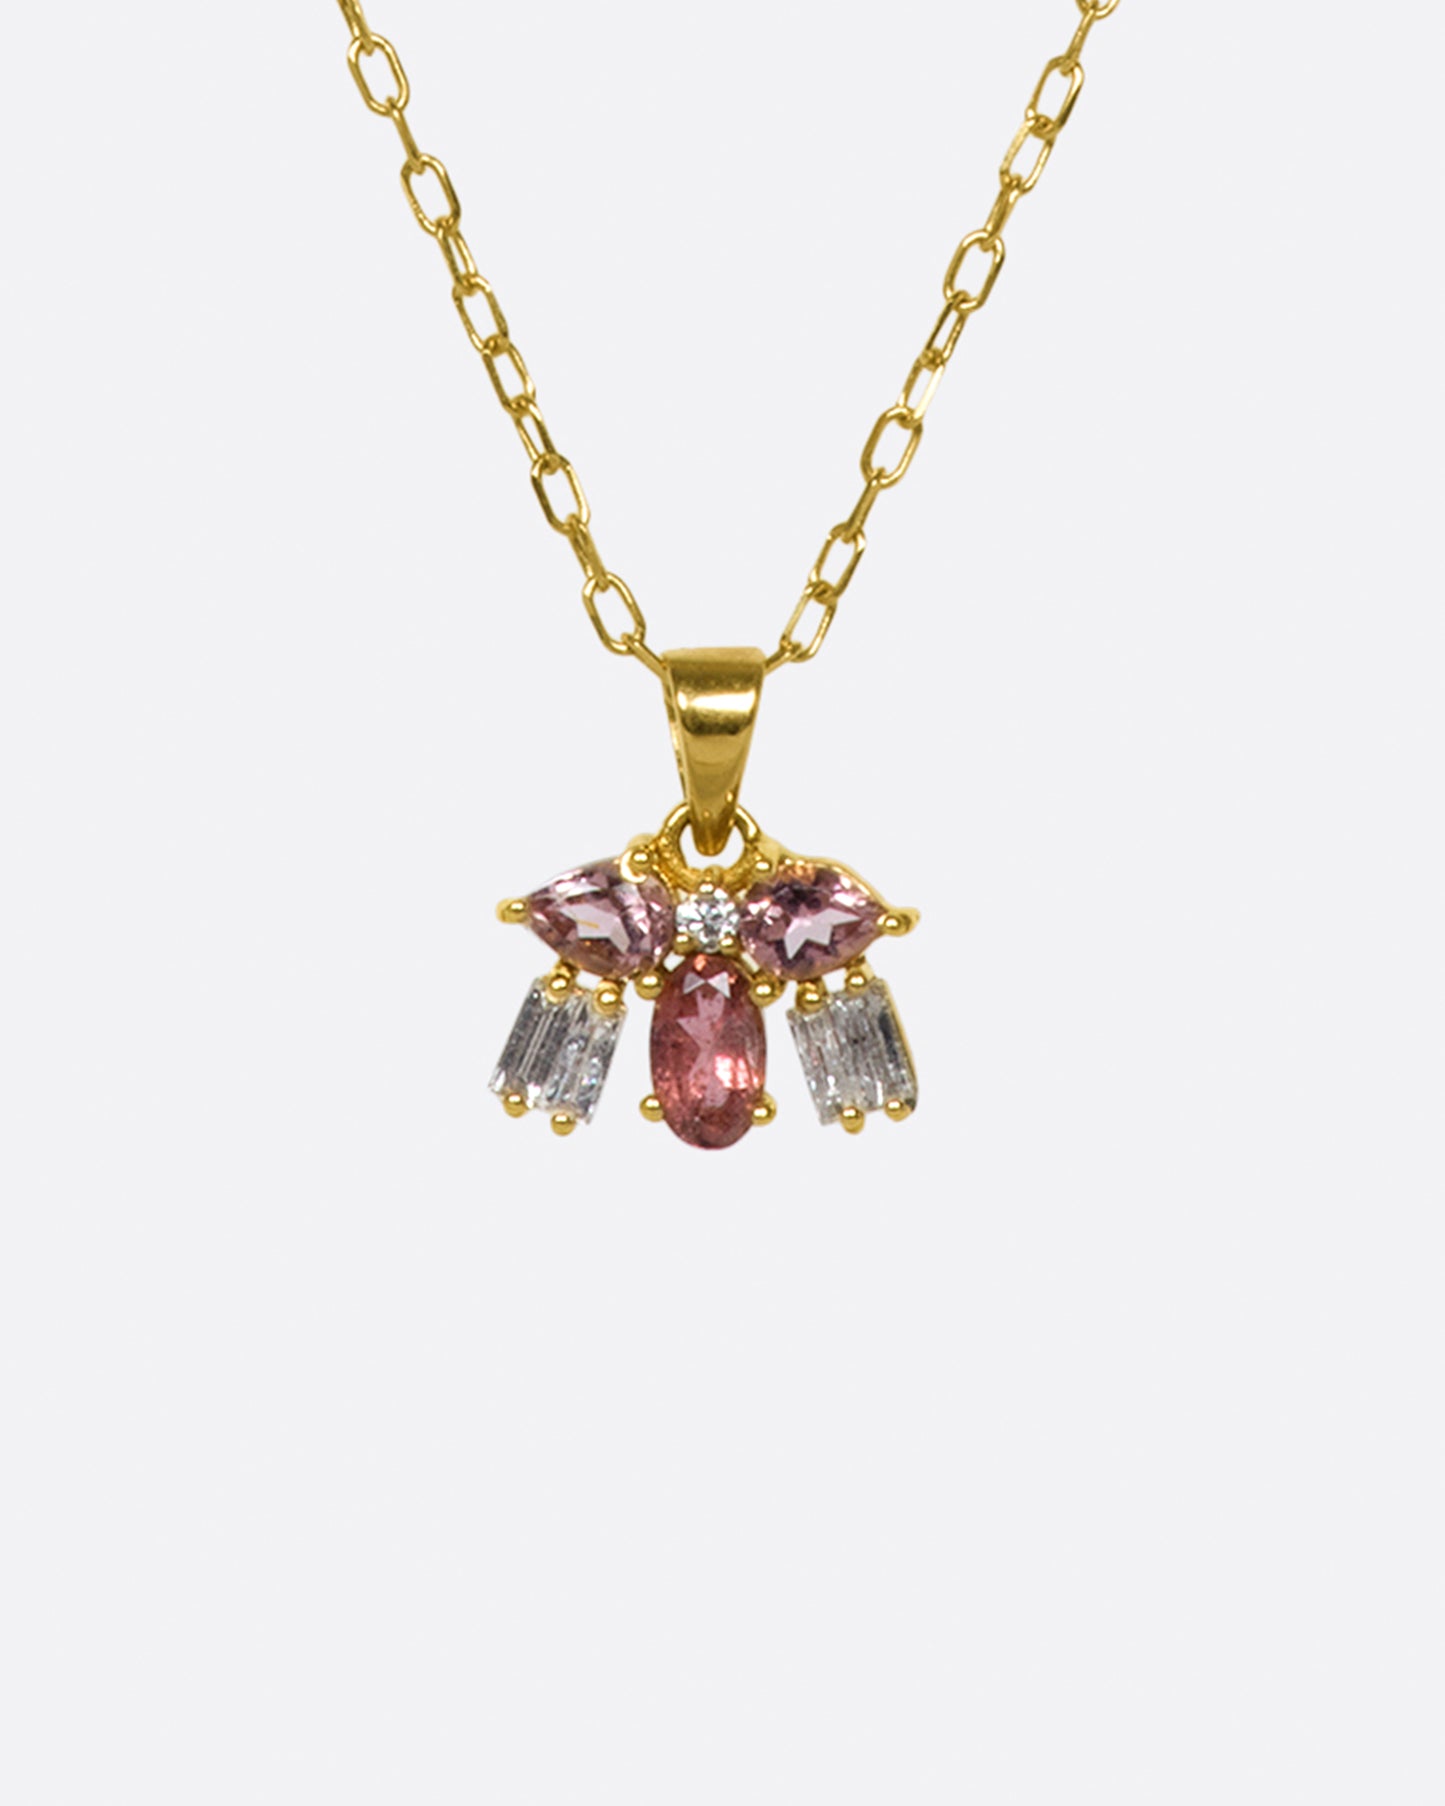 A tiny creature made from tourmalines and diamonds, hanging on a delicate chain.